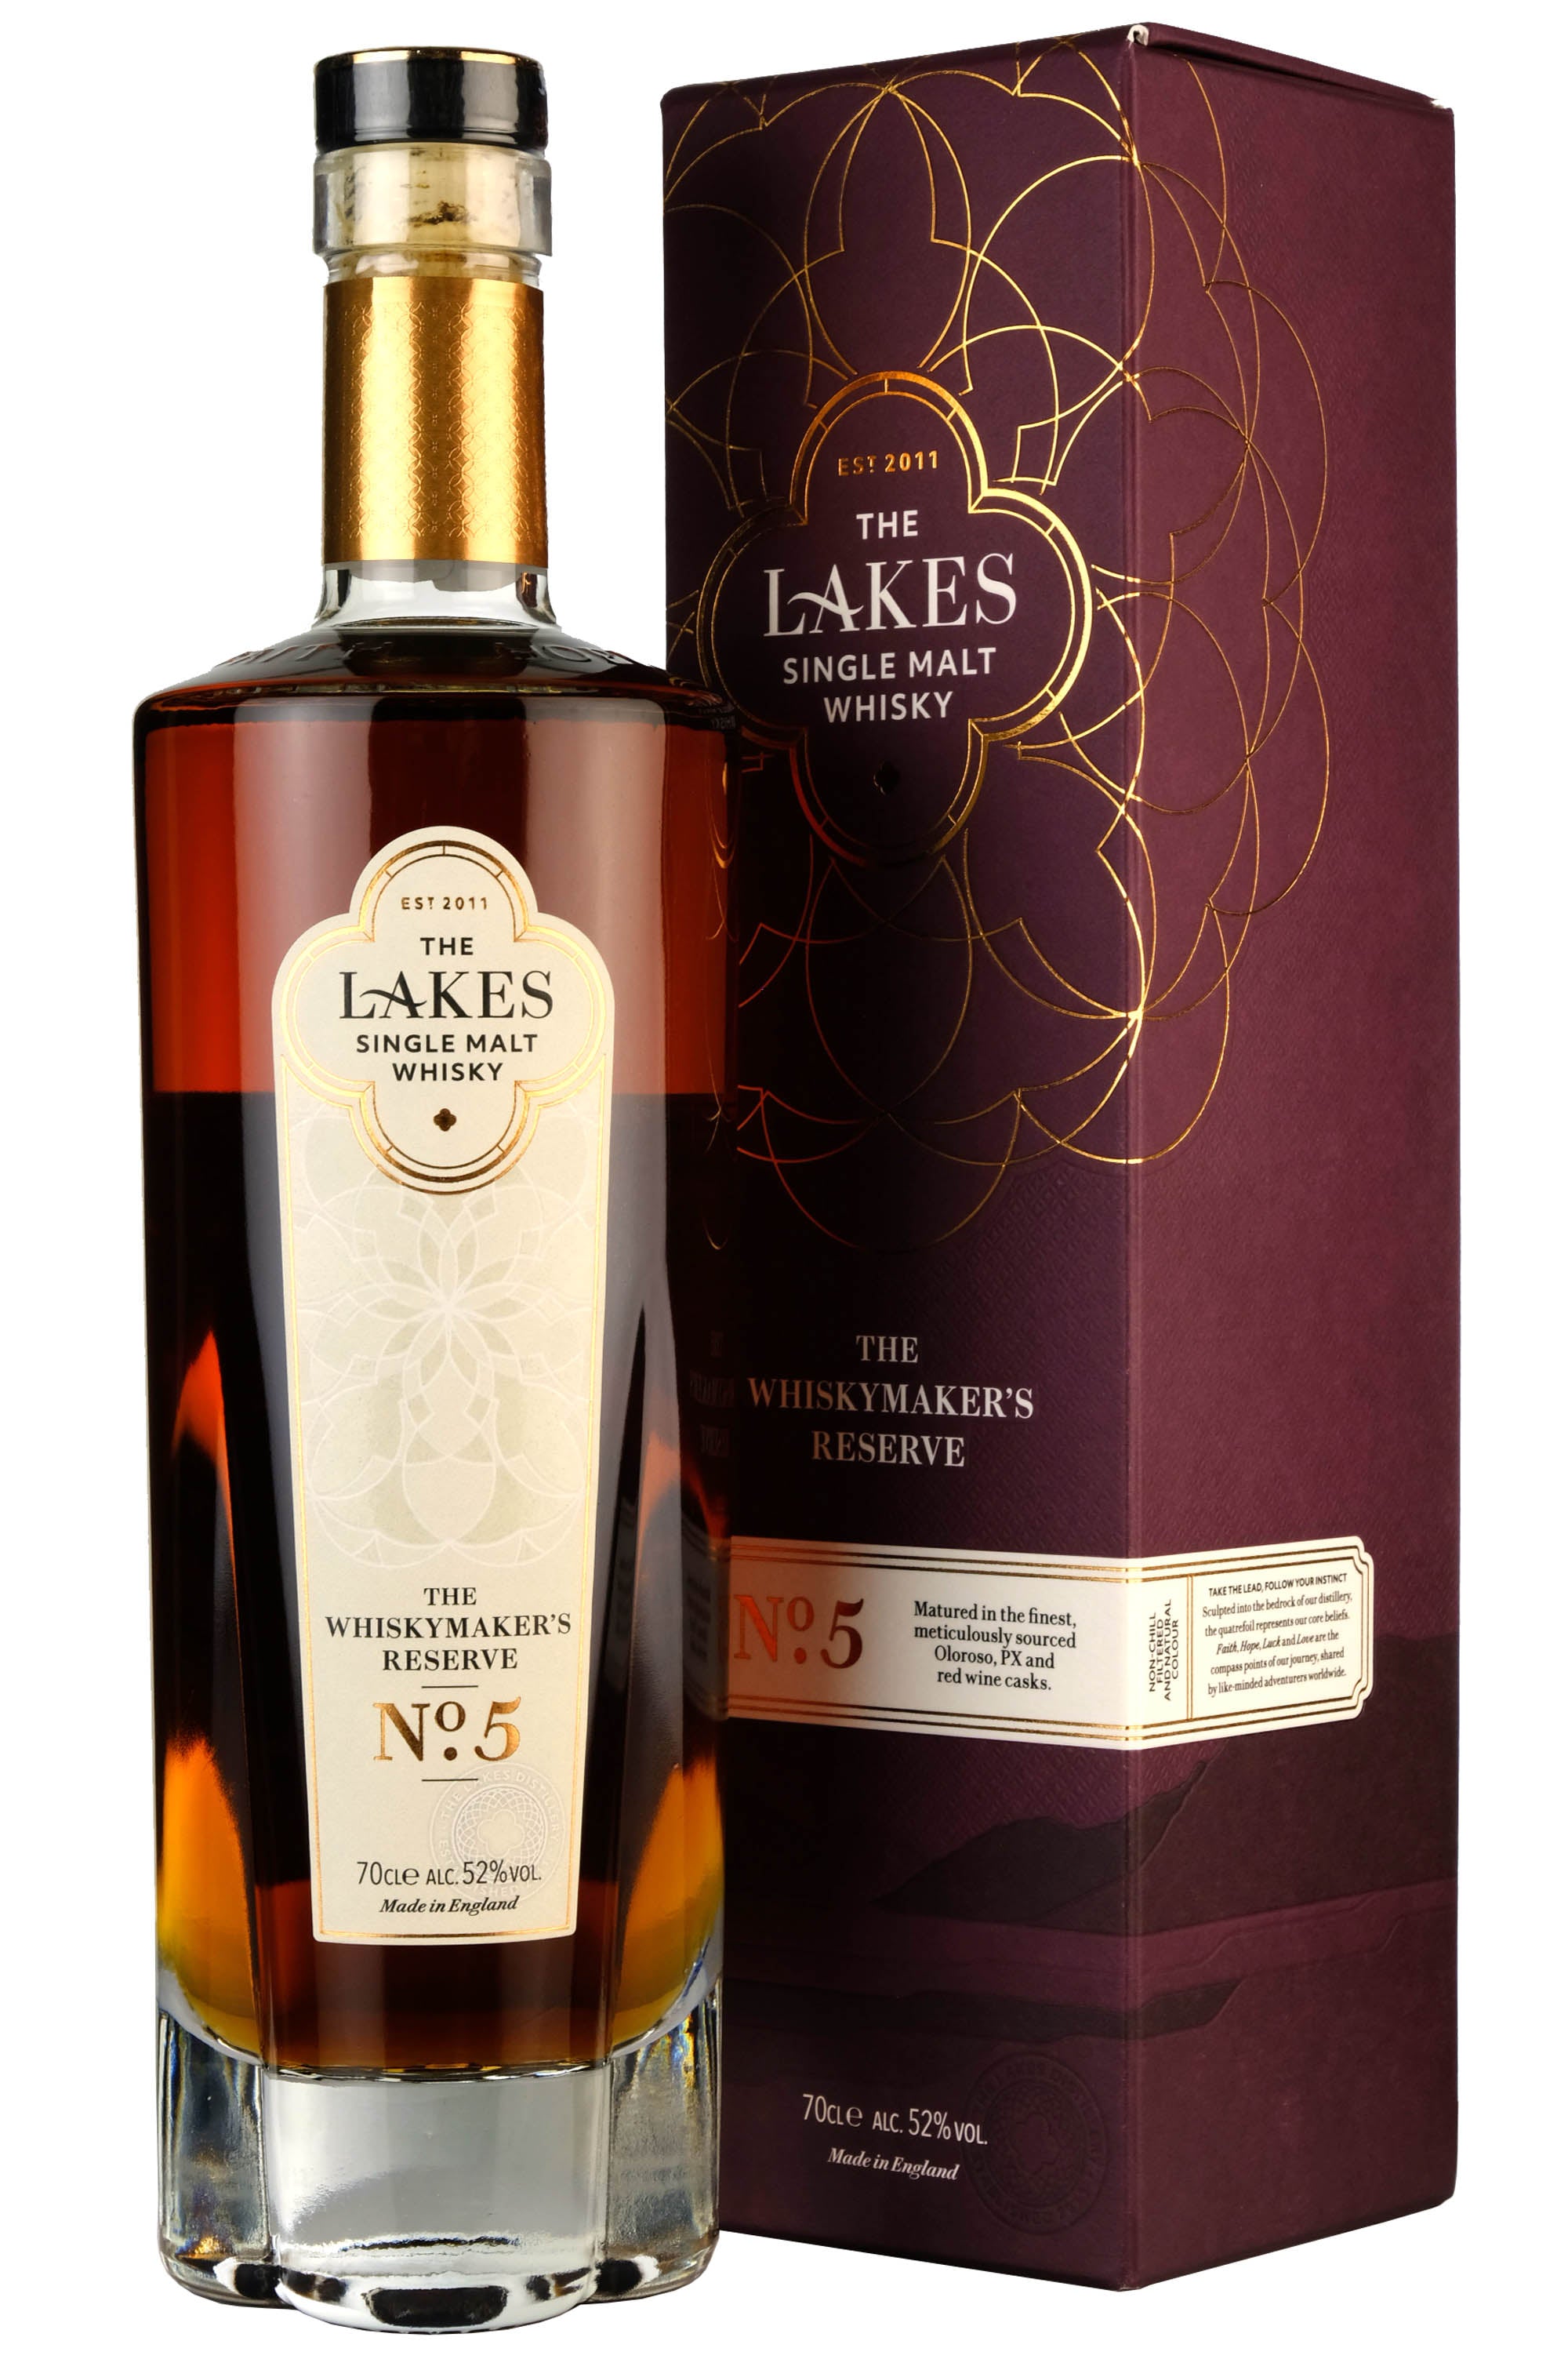 The Lakes The Whiskymaker's Reserve No.5